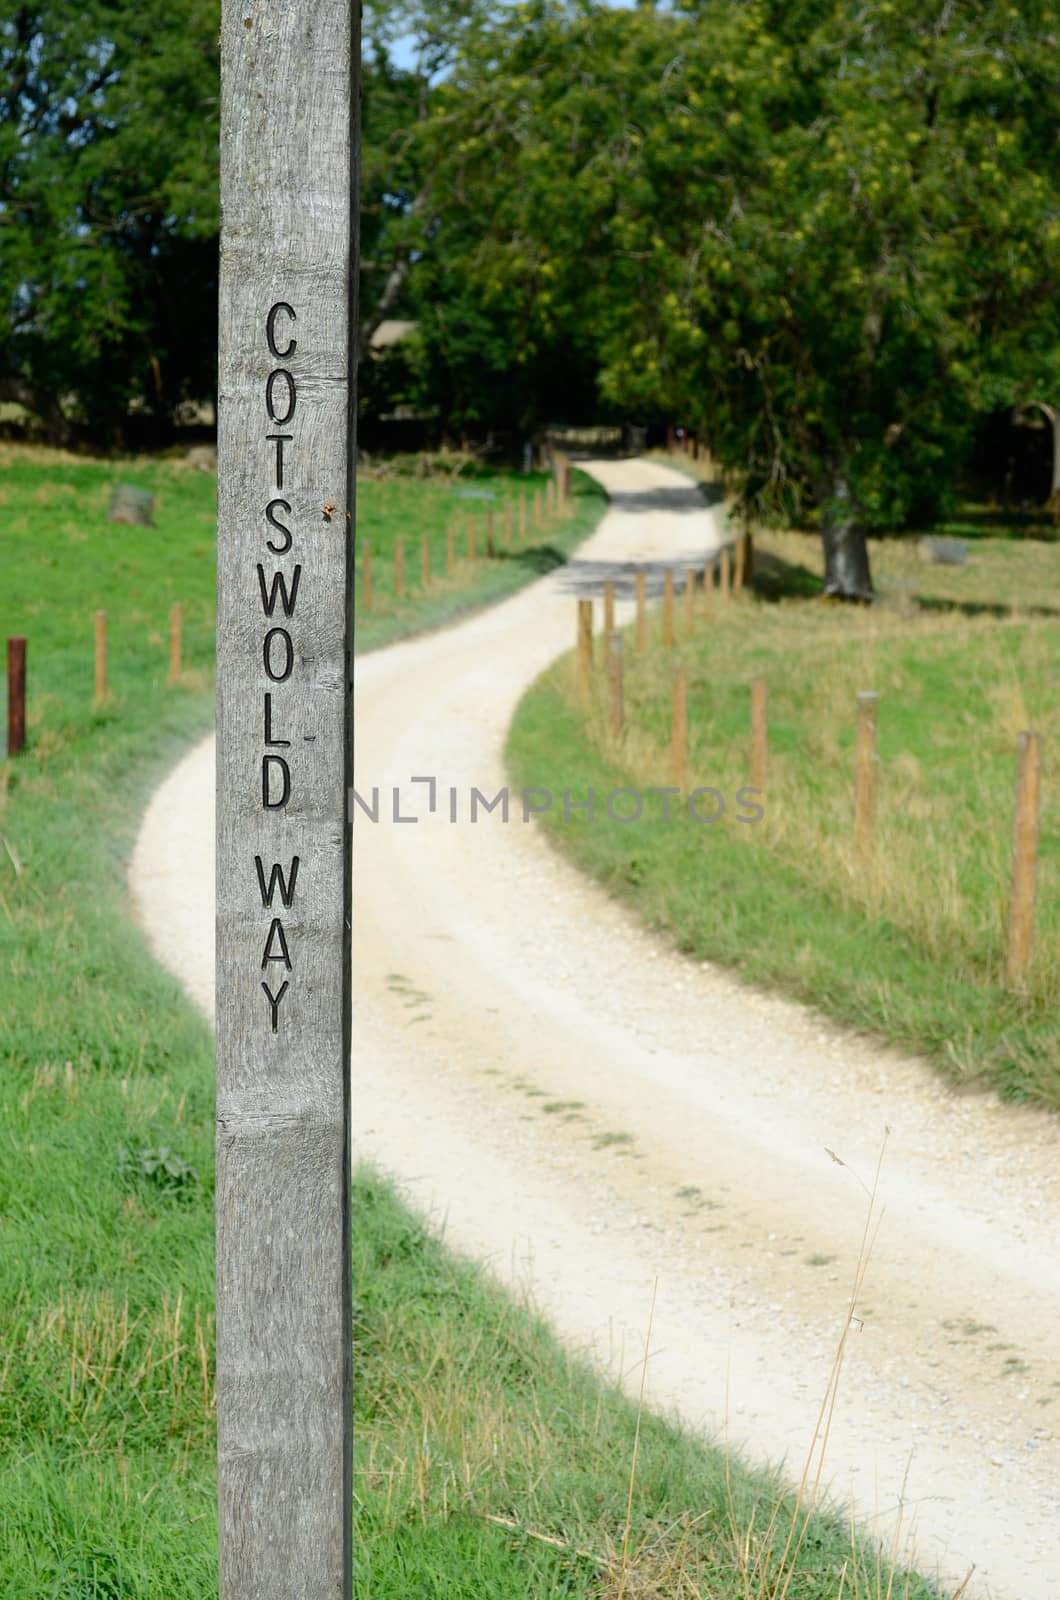 Signpost along the Cotswold Way long-distance footpath through the Cotswolds in western England, UK.